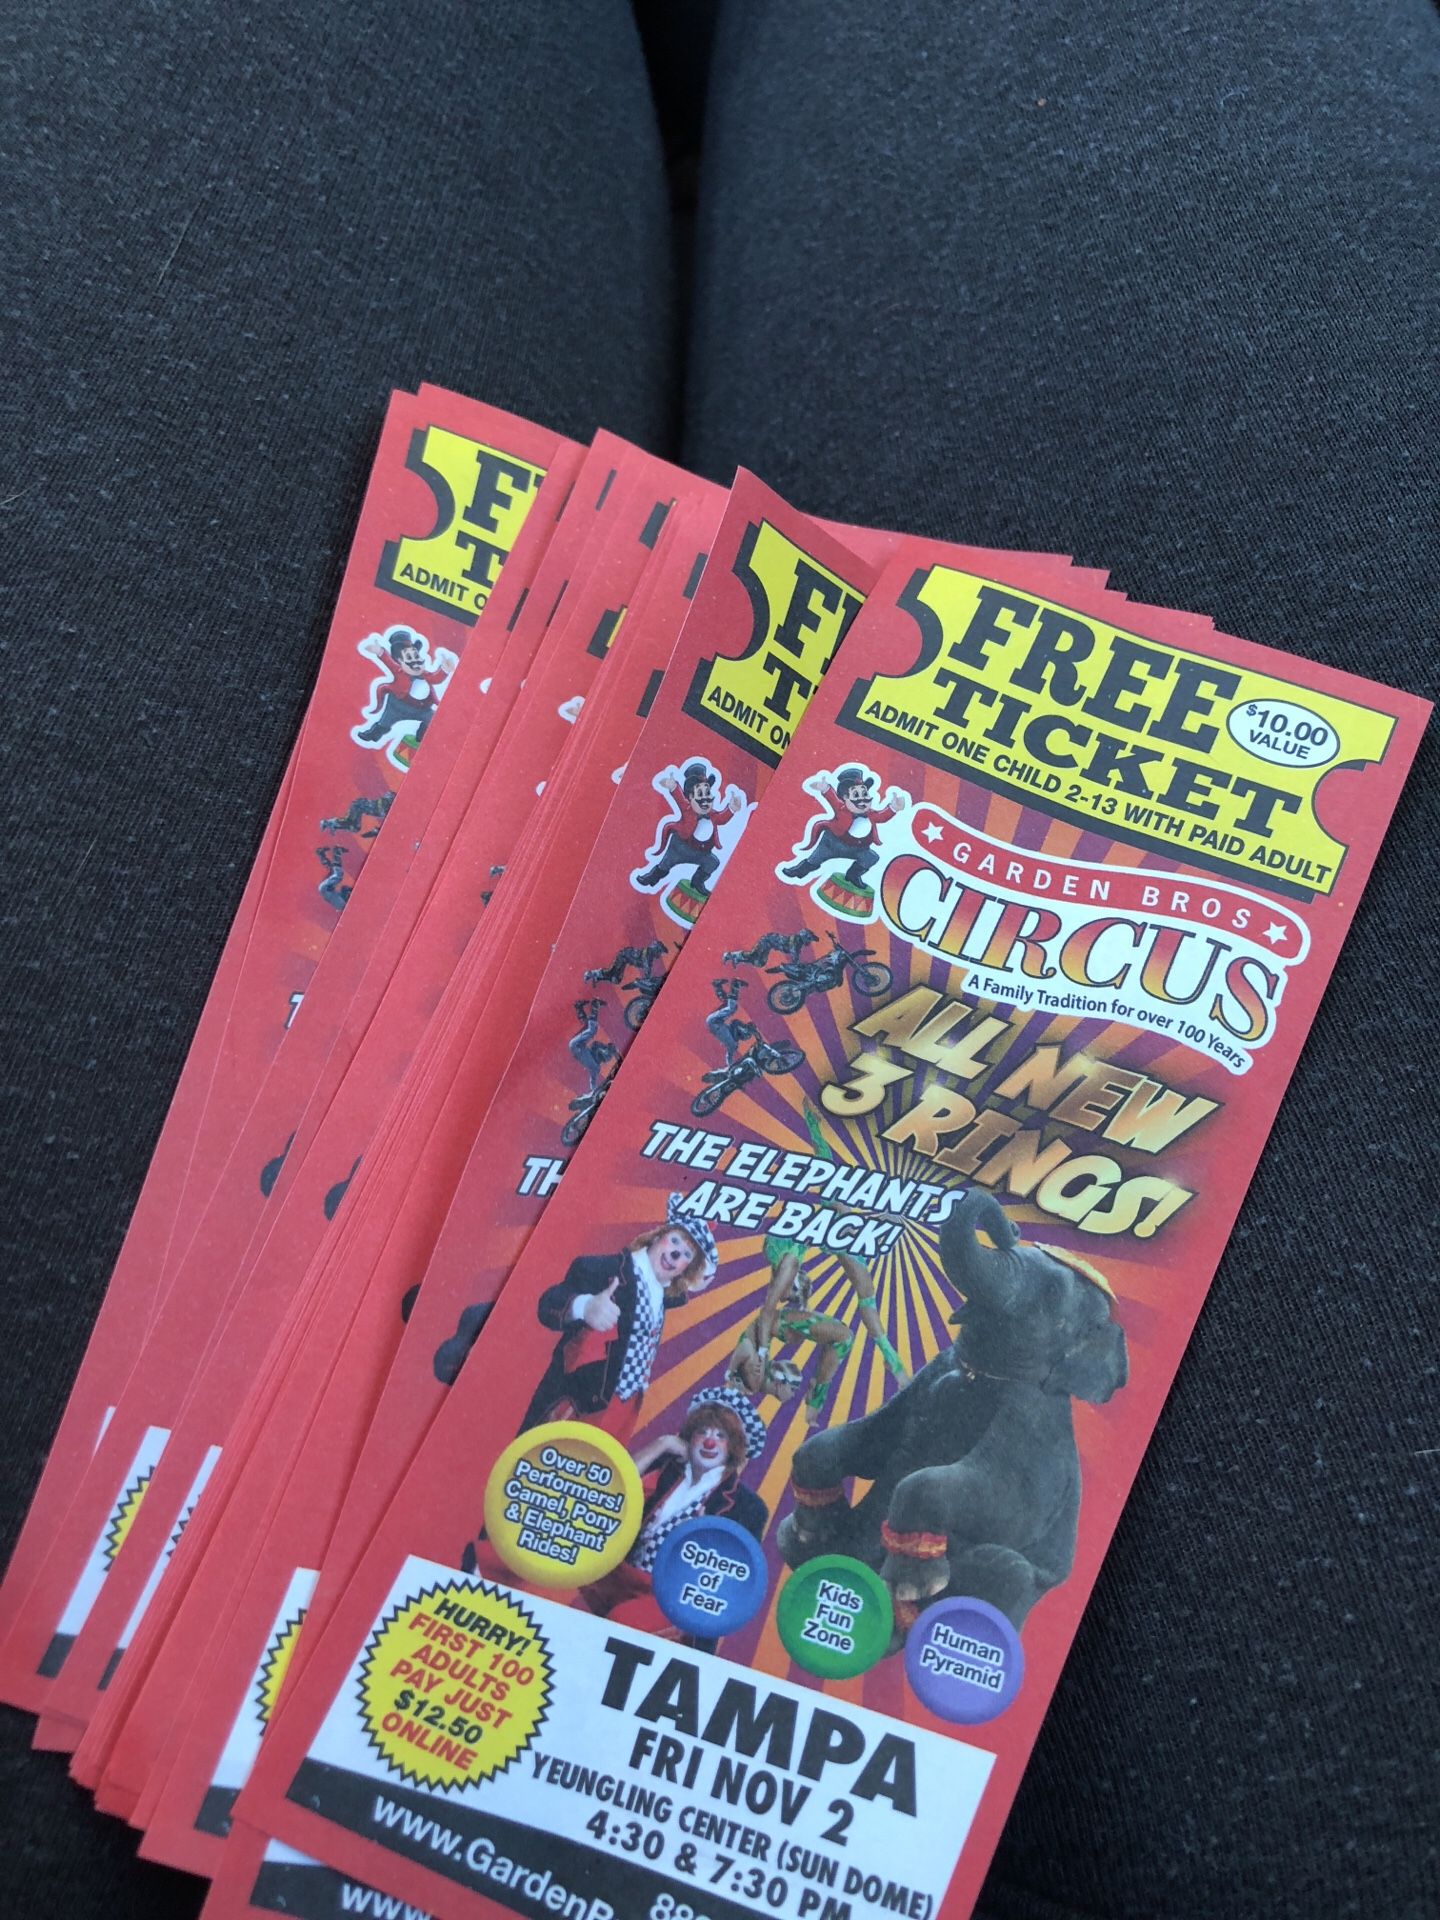 Circus tickets